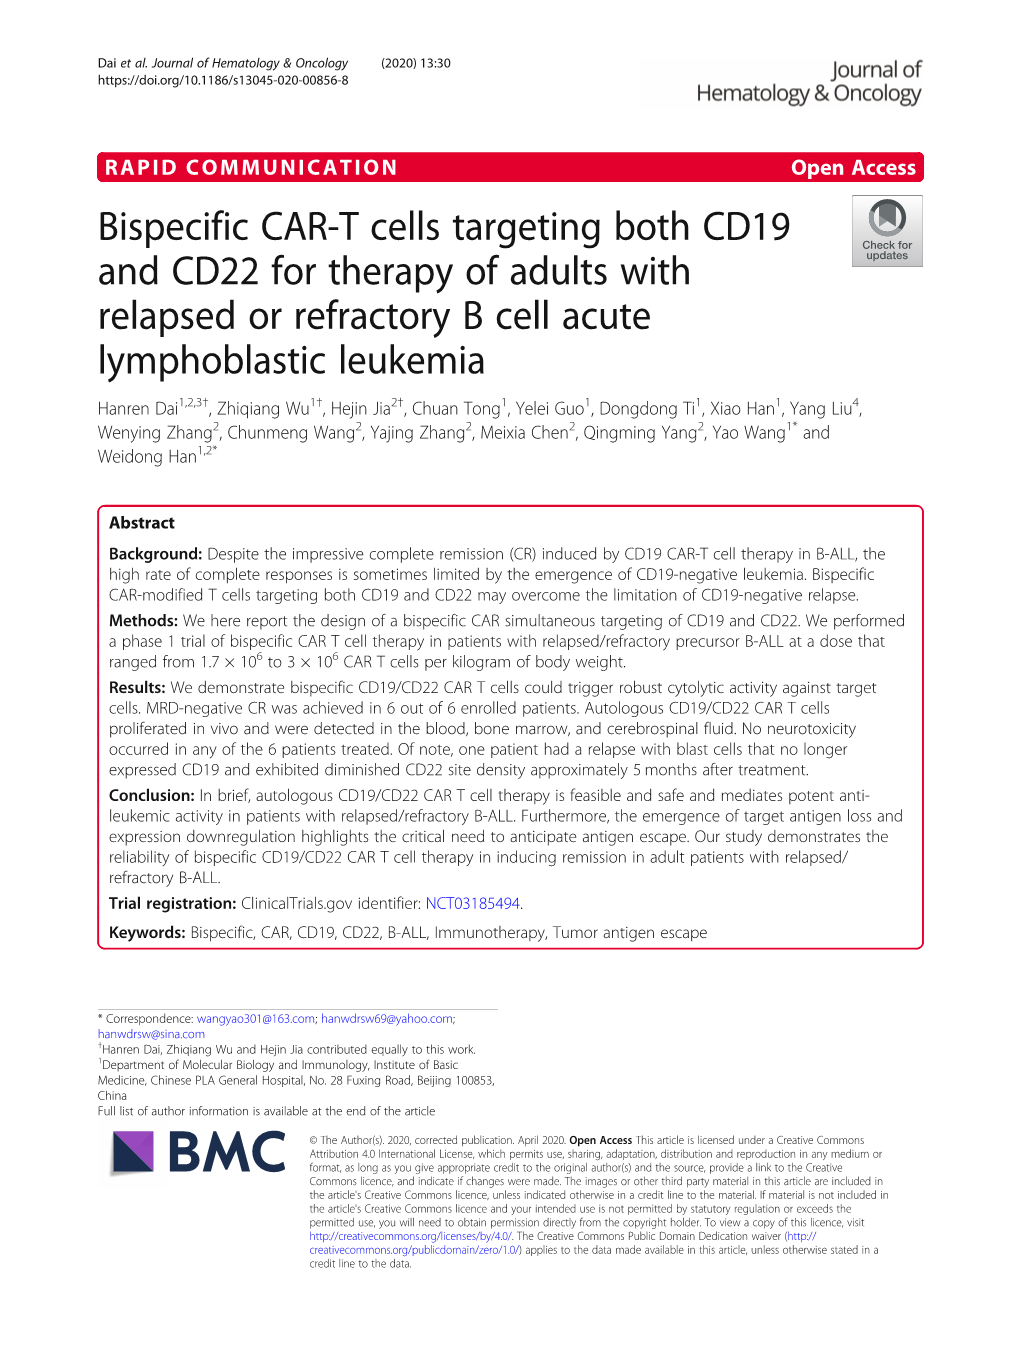 Bispecific CAR-T Cells Targeting Both CD19 and CD22 for Therapy Of